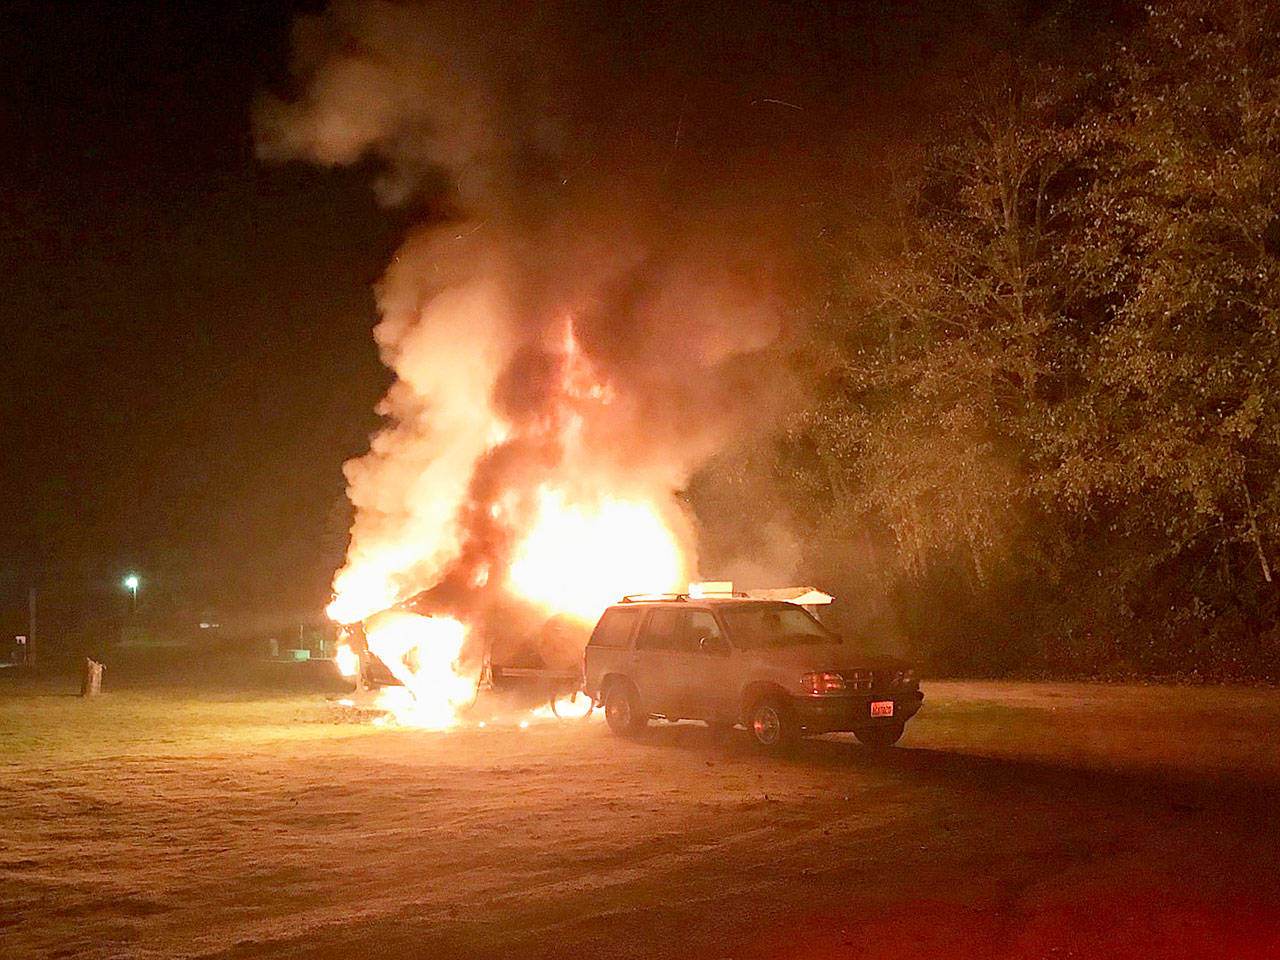 A man was severely injured in an RV fire Thursday morning at Island County Fairgrounds. Photo provided by South Whidbey Fire/EMS